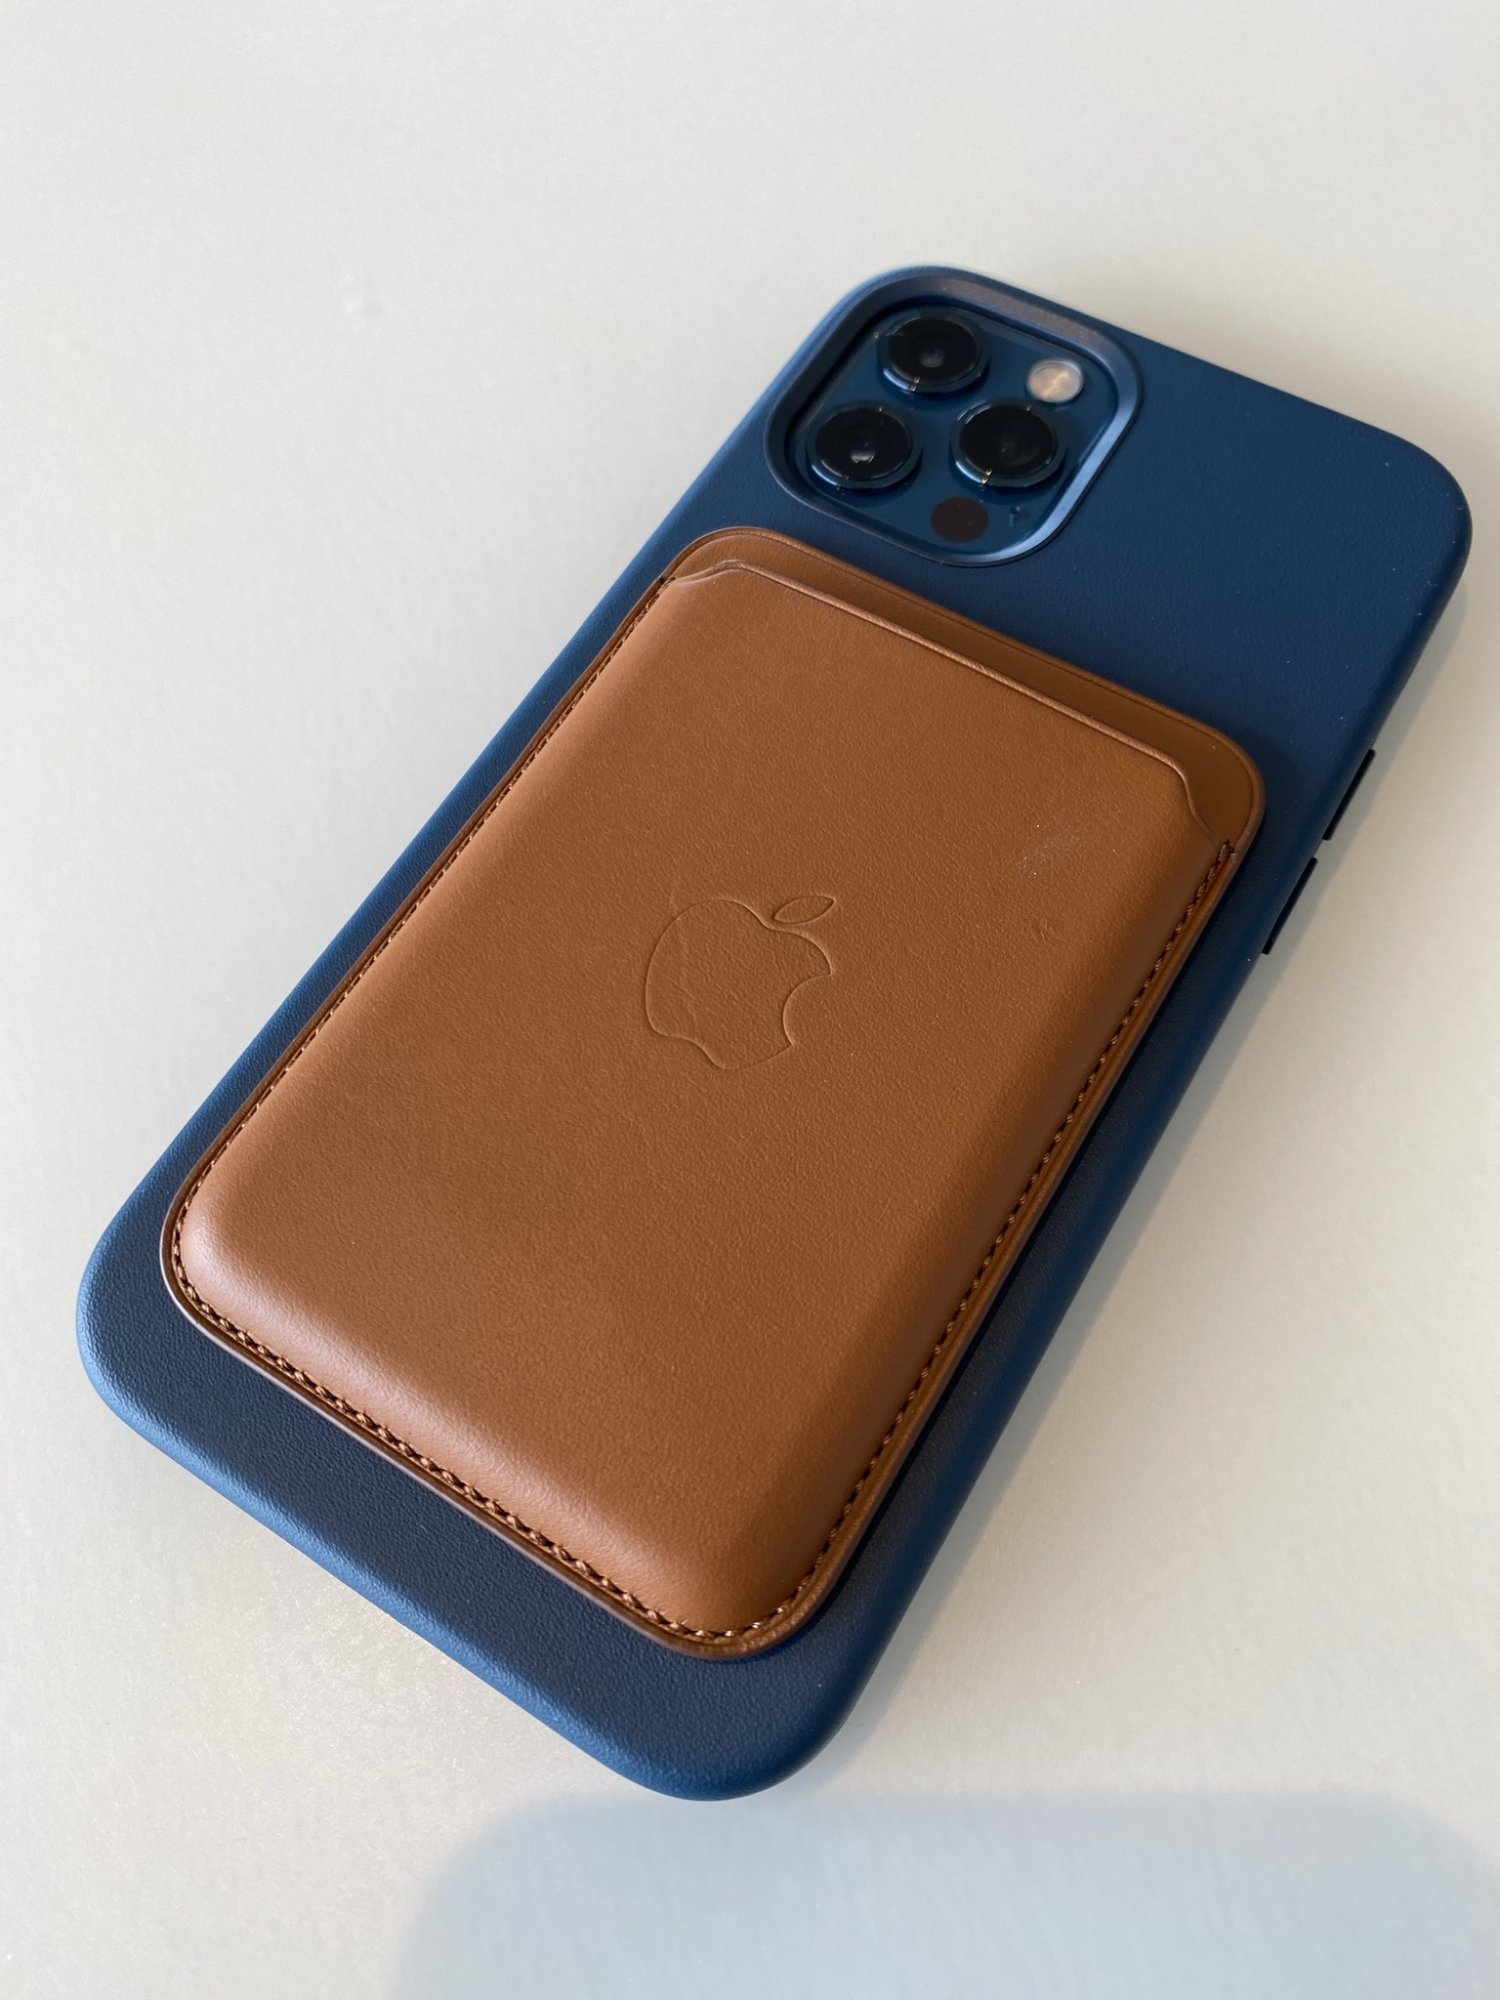 iPhone 12 leather case and leather wallet combination thread